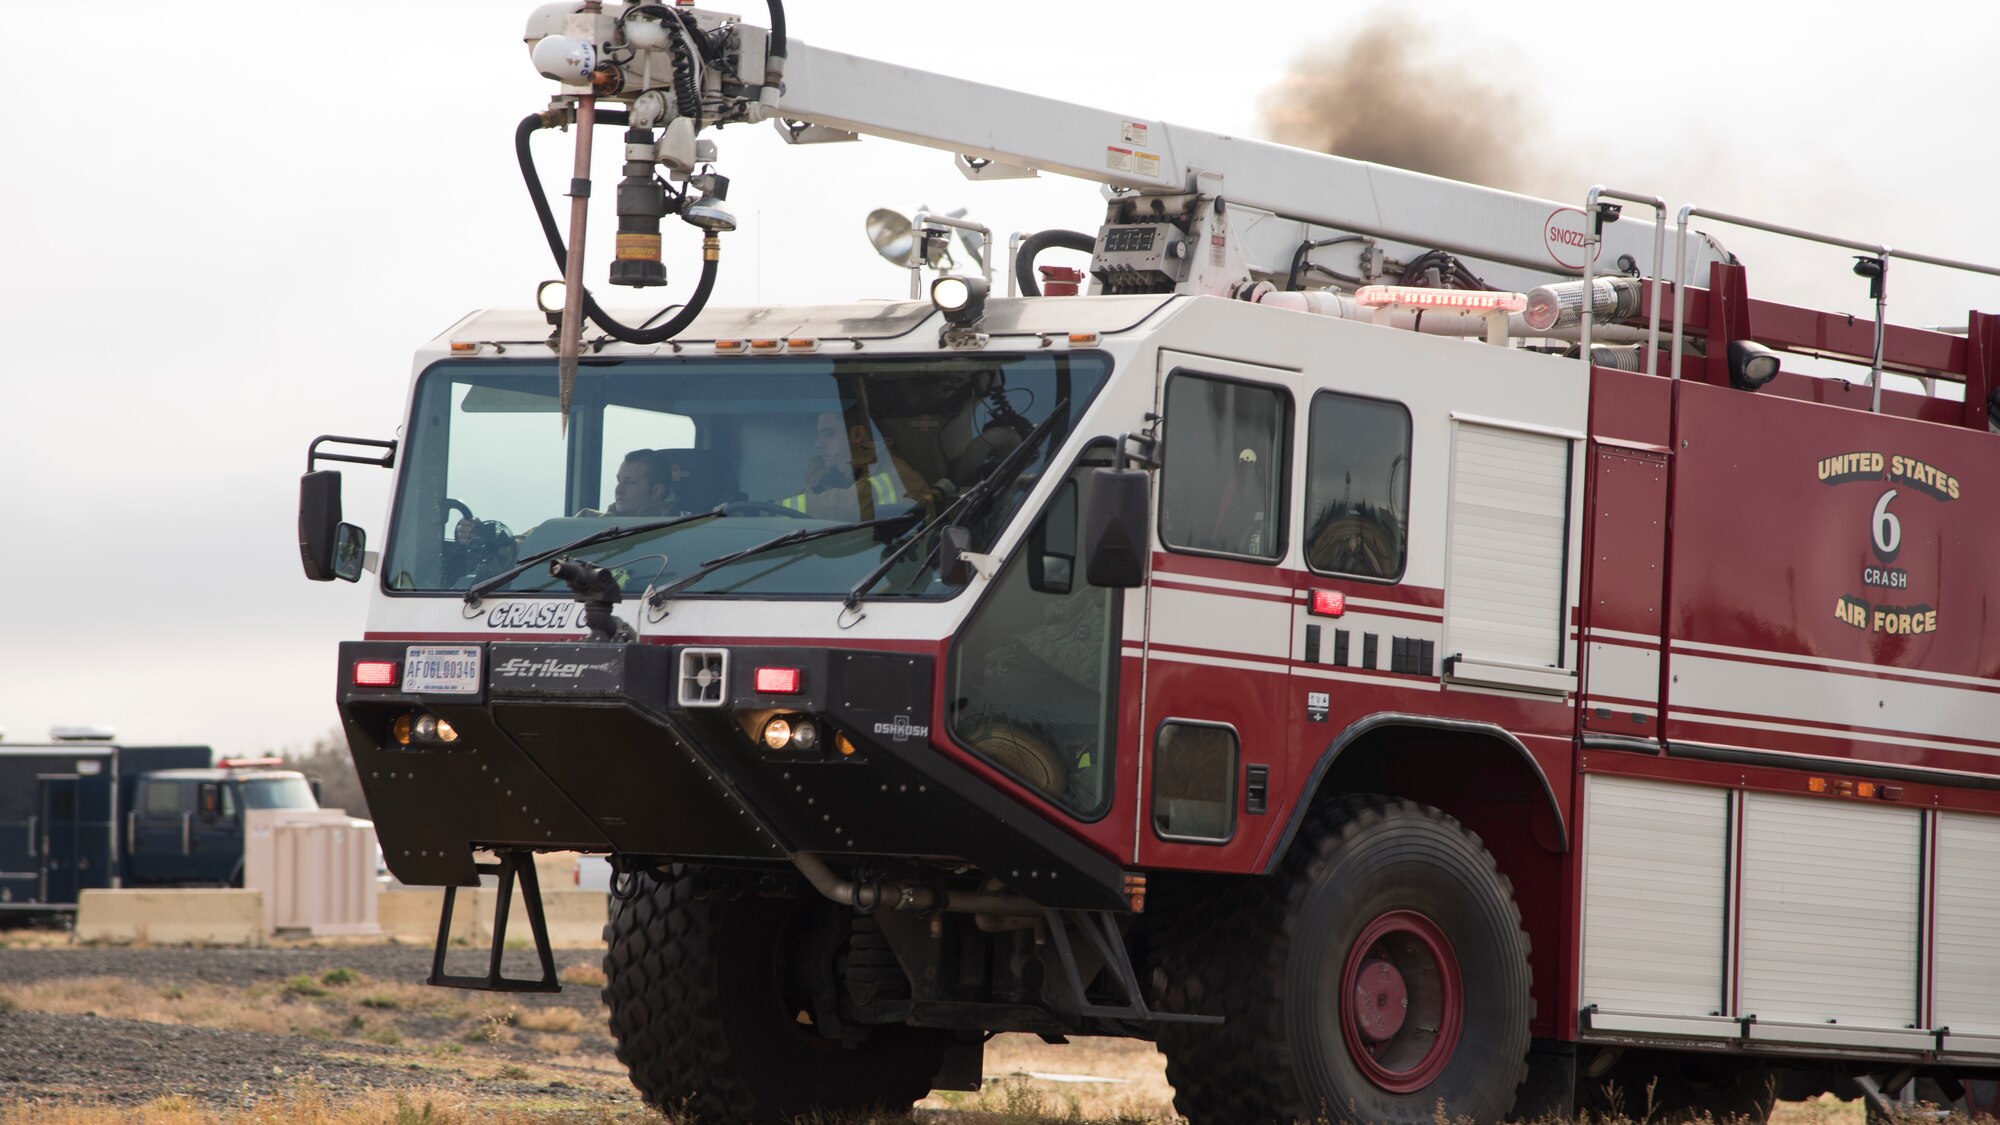 92nd Civil Engineering Squadron firefighters drive into a training area during demonstration of the bases emergency response capabilities to members of the Spokane Local Emergency Planning Committee at Fairchild Air Force Base, Washington, Nov. 7, 2018. The LEPC meets at different locations monthly to help survey local disaster response capabilities and Team Fairchild volunteered to host during the month of November as a way to demonstrate the specialized resources the base can offer to the local community. (U.S. Air Force Photo/ Senior Airman Ryan Lackey)